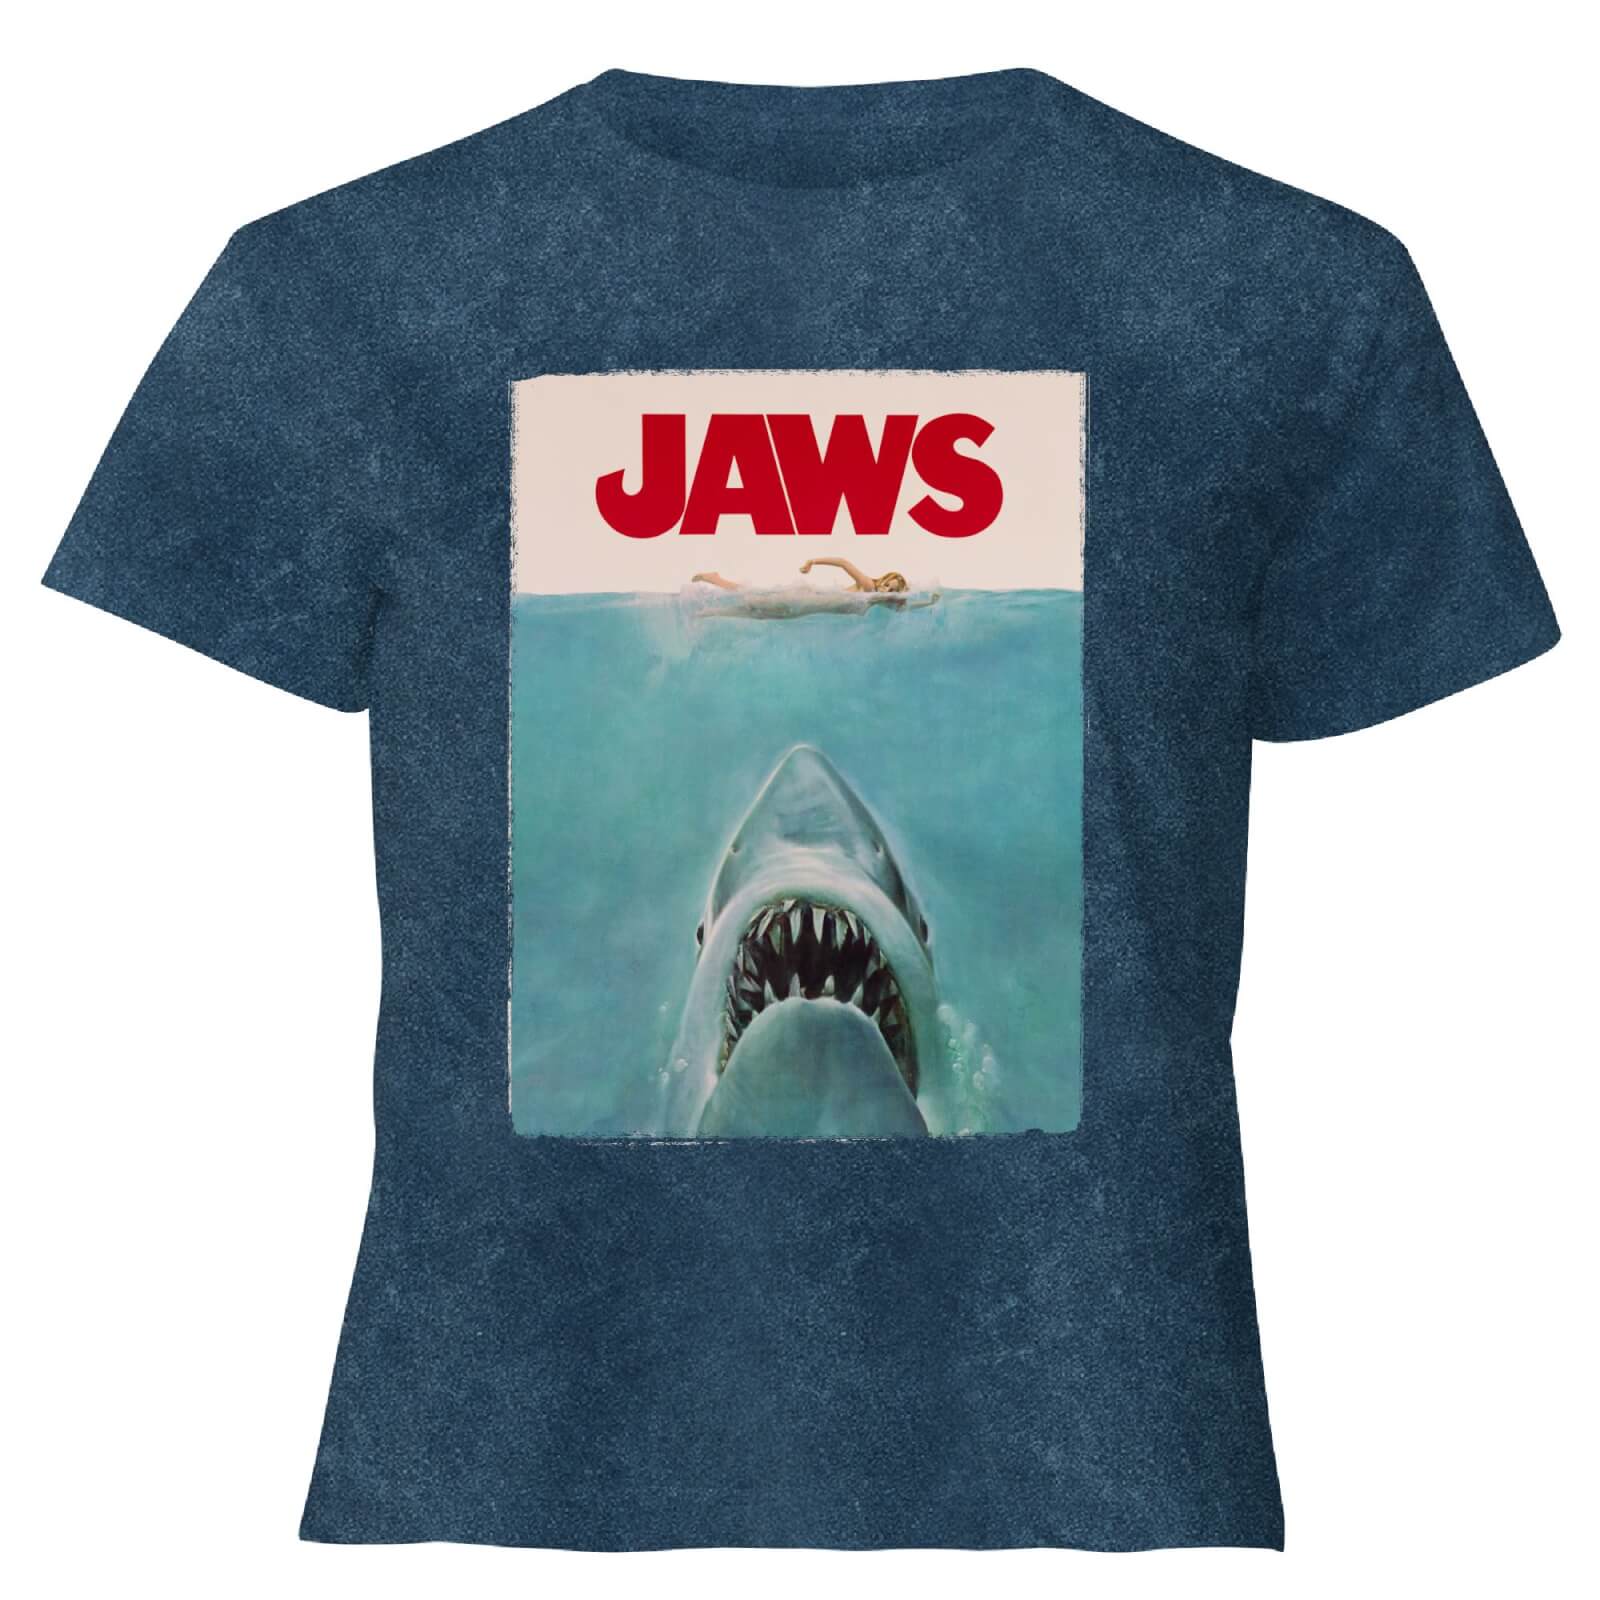 Jaws Classic Poster - Women's Cropped T-Shirt - Navy Acid Wash - XS - Navy Acid Wash